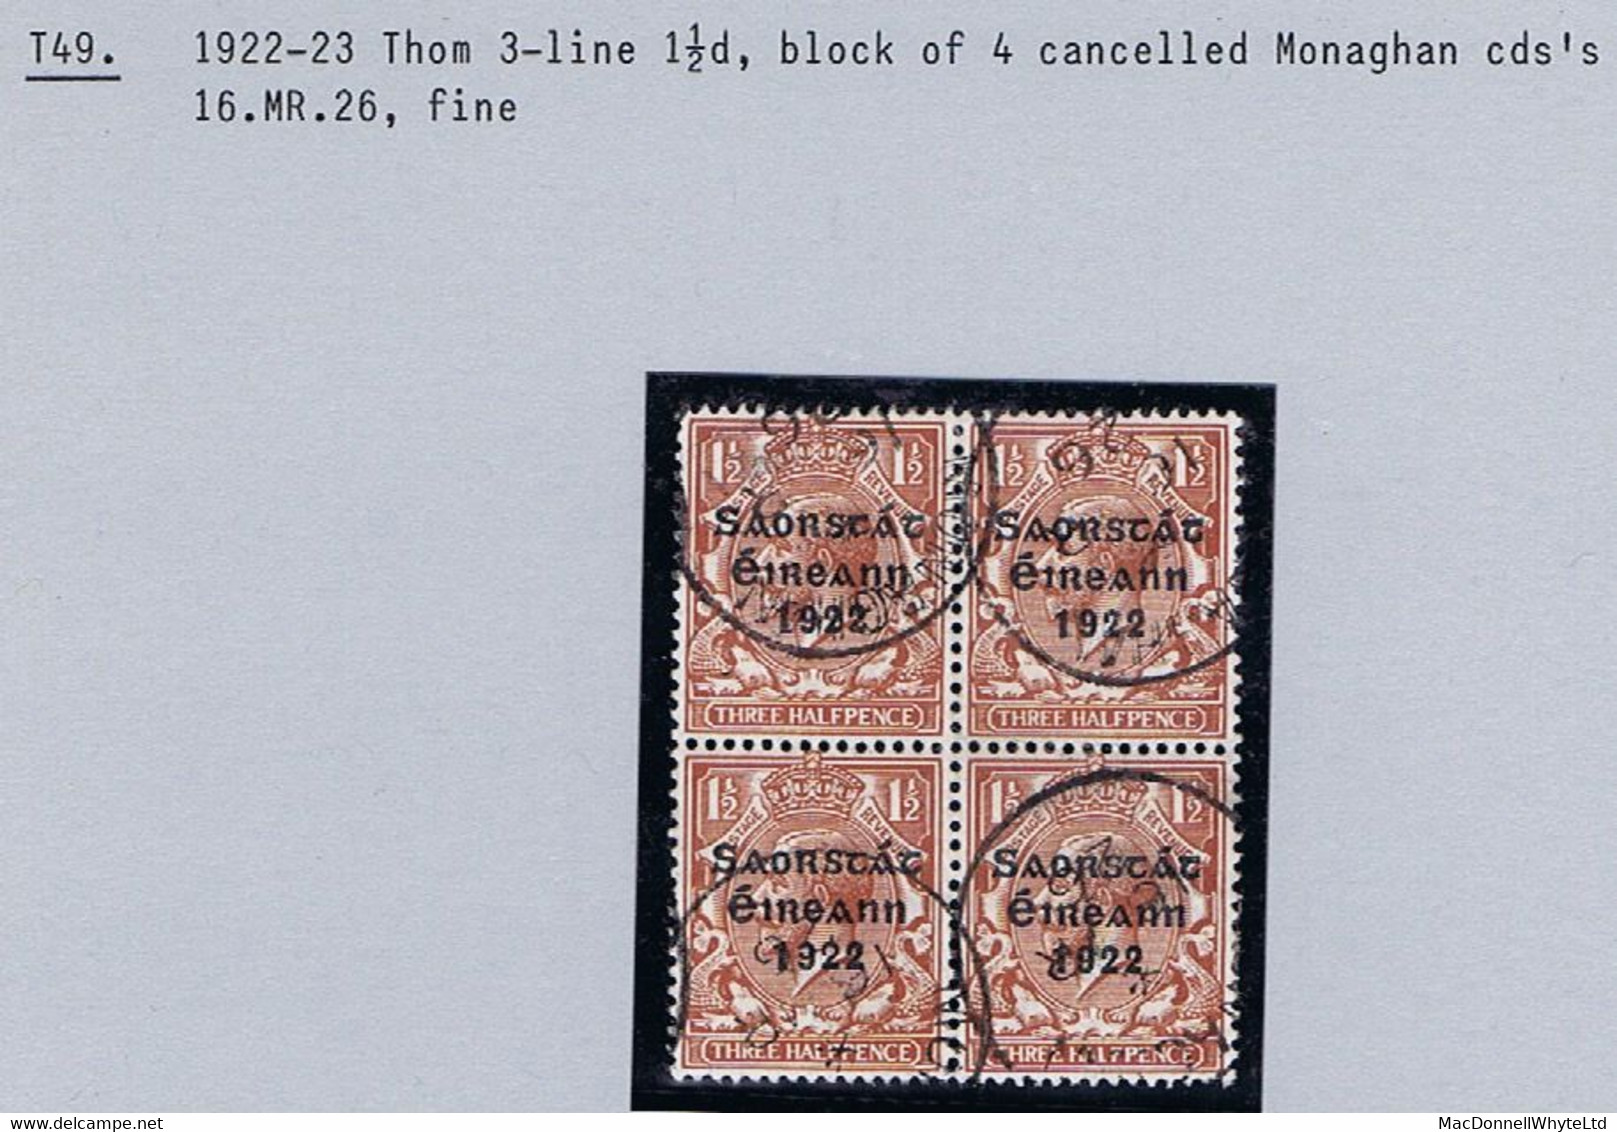 Ireland 1922-23 Thom Saorstat 3-line Ovpt On 1½d Brown Used Block Of 4, MONAGHAN 16 MR 26 Small Steel Cds - Oblitérés